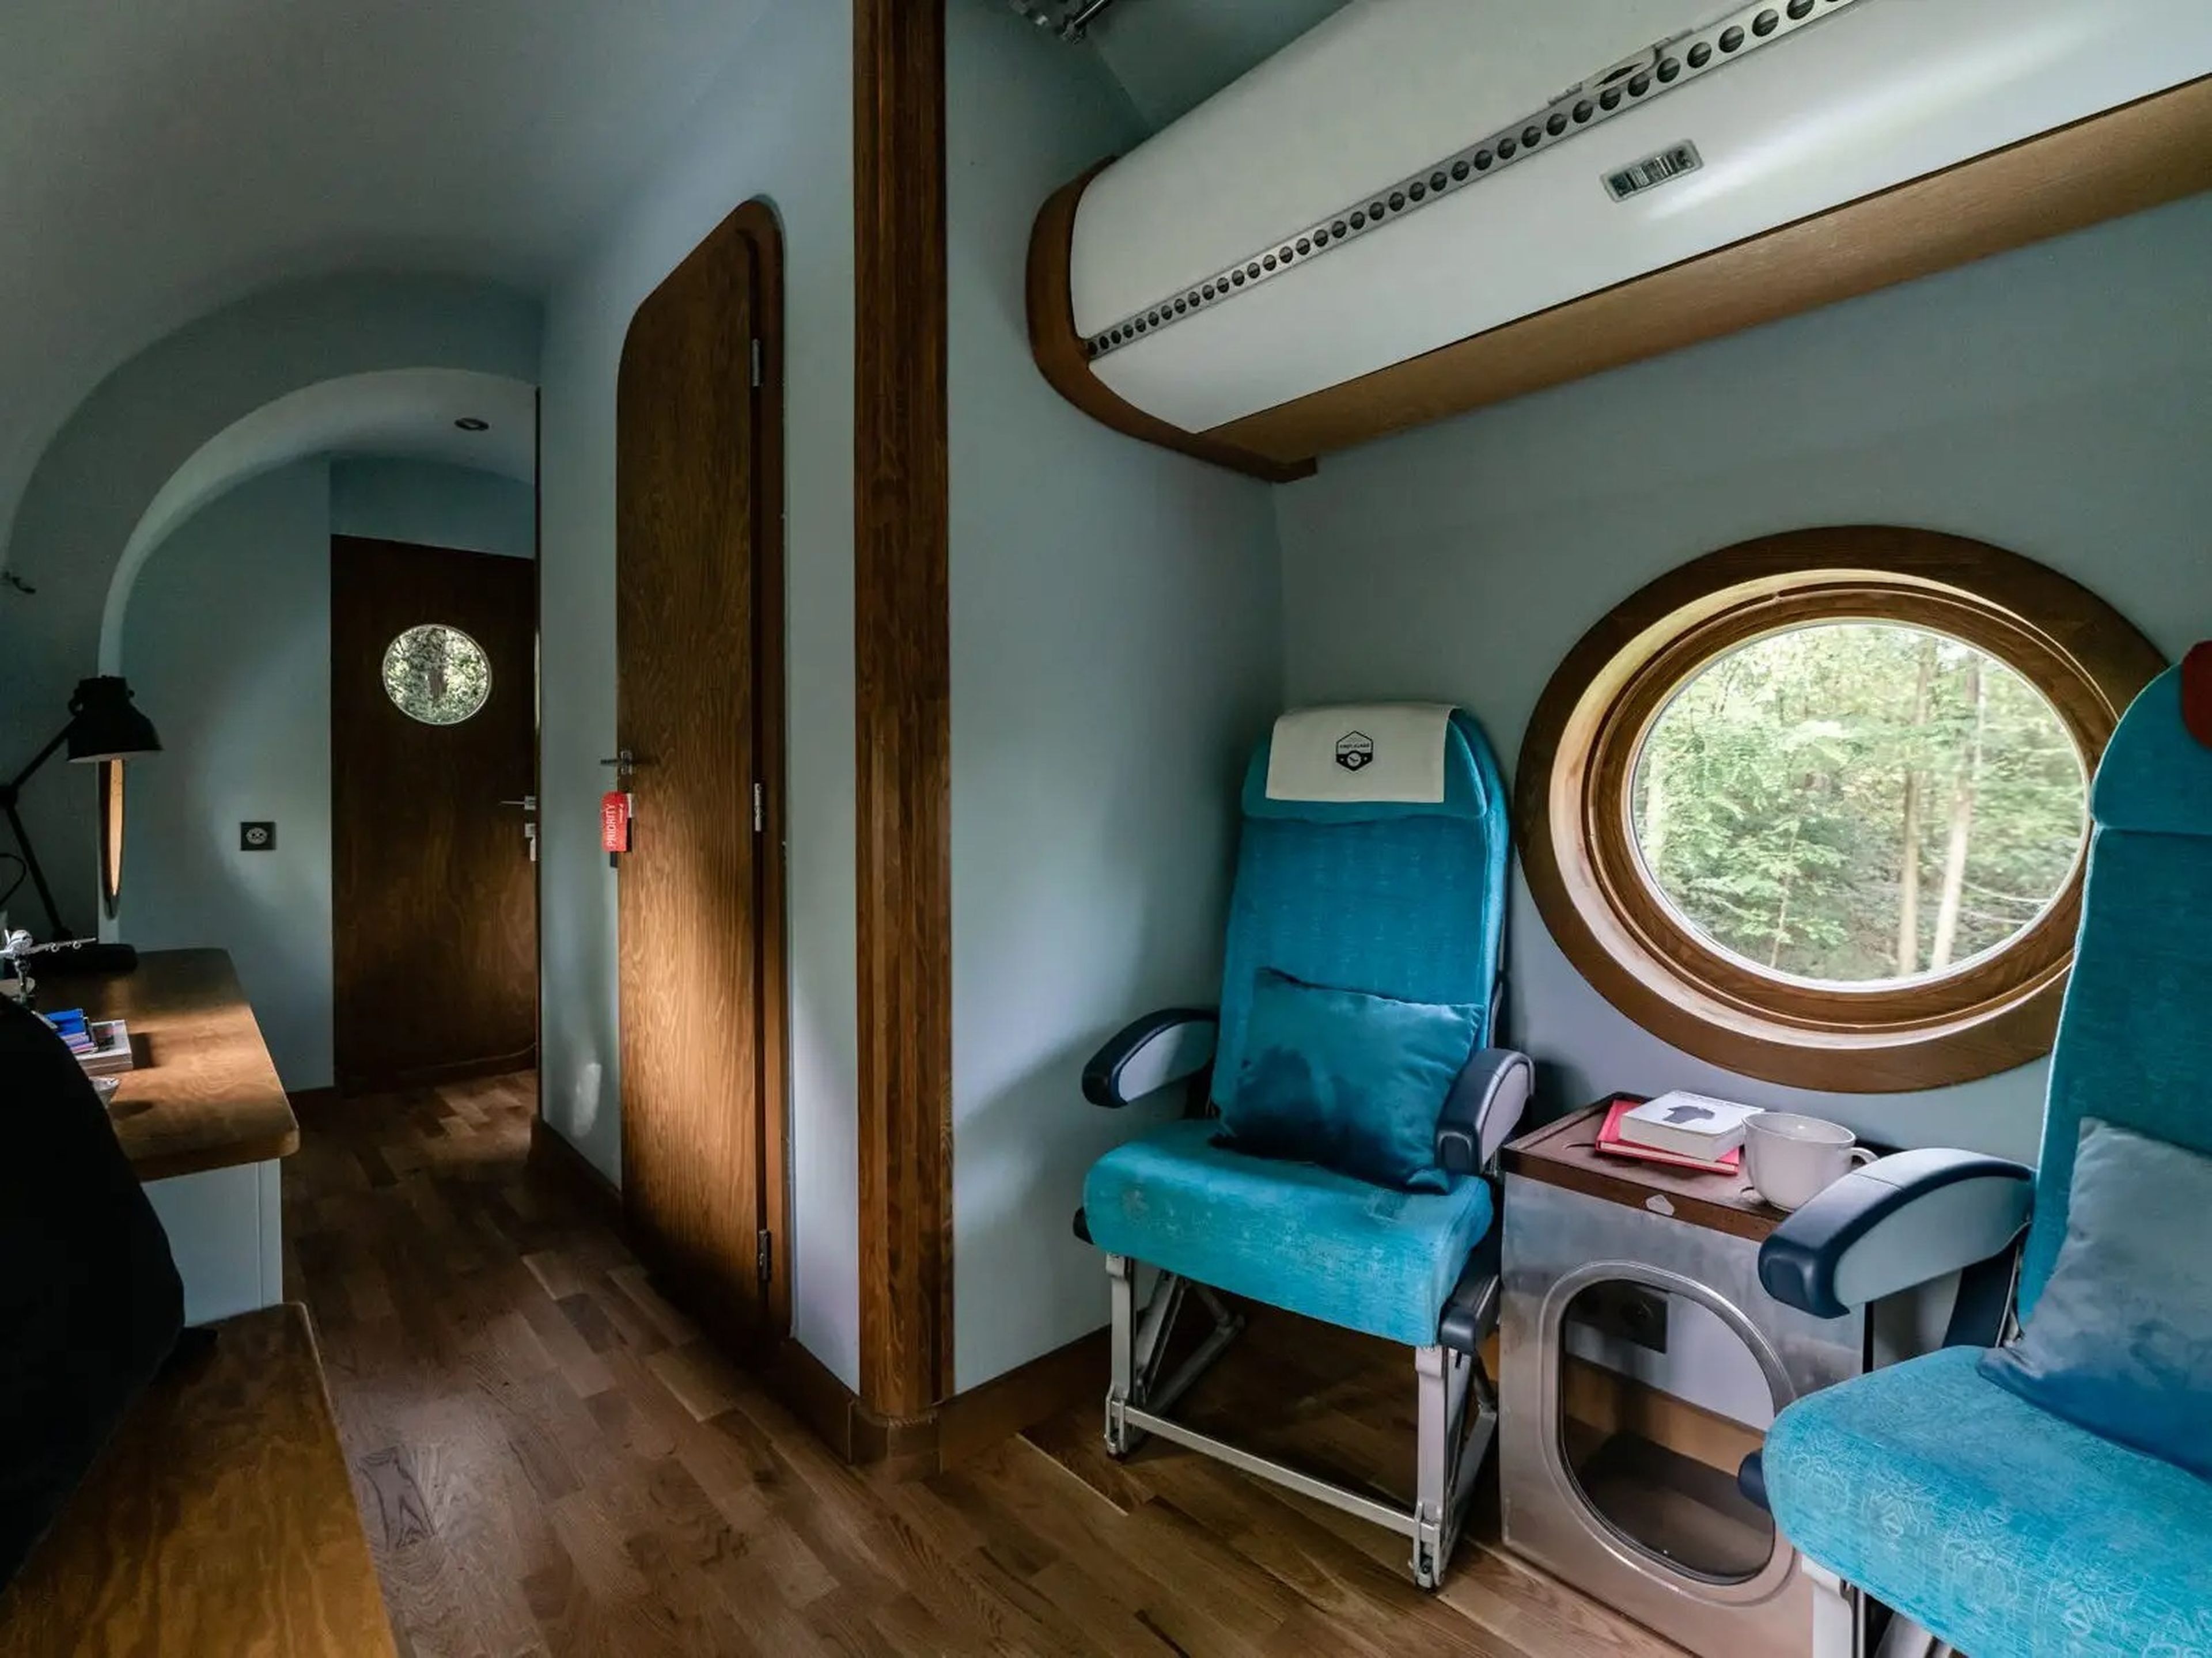 The Jet House is furnished with actual airplane seats.